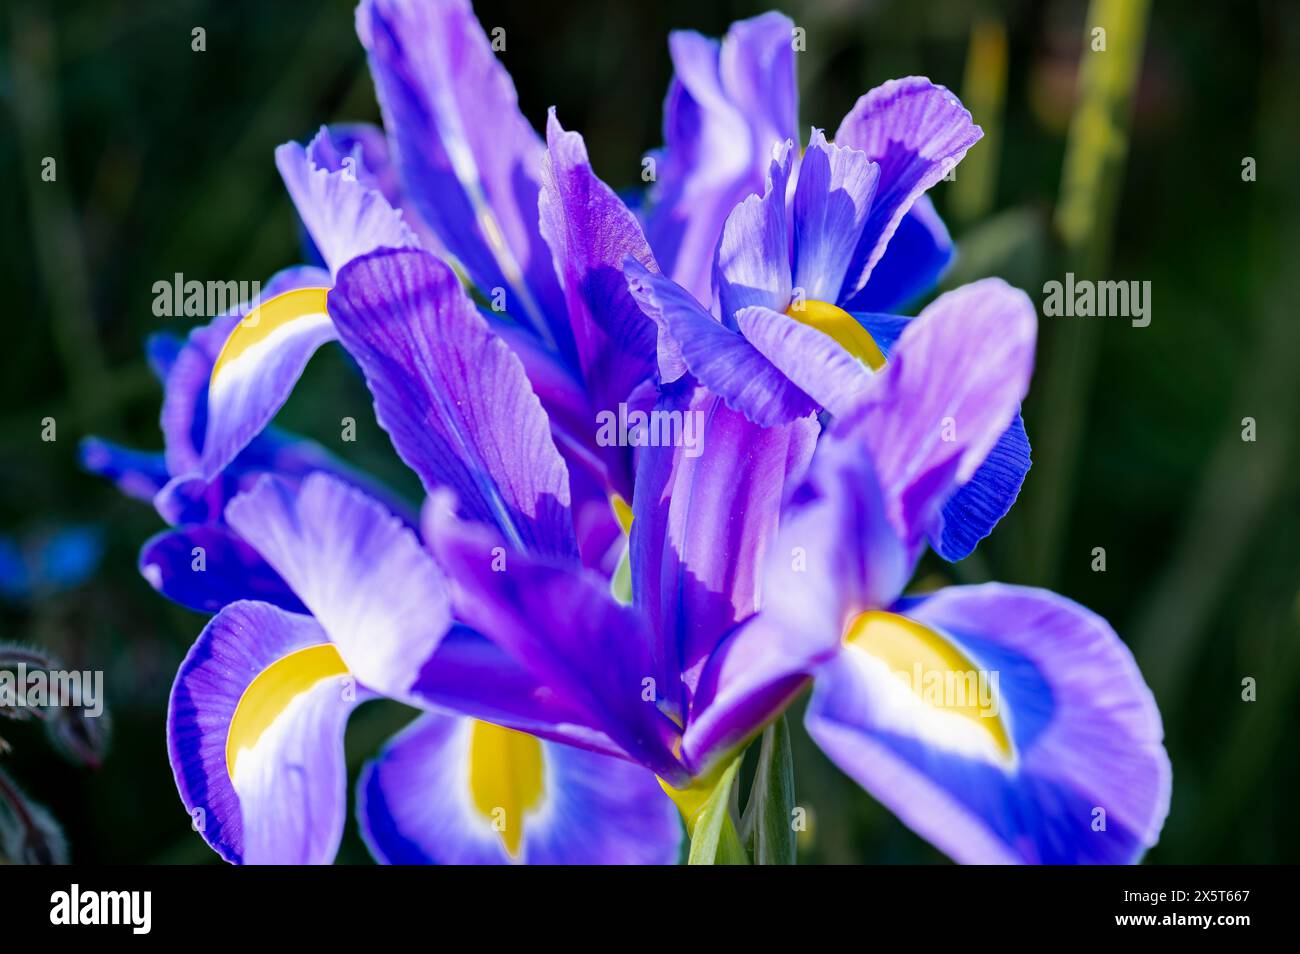 Close-up of a blue iris flower in a garden. Iris is a genus of perennial plants with rhizomes or bulbs in the Iridaceae family. Stock Photo